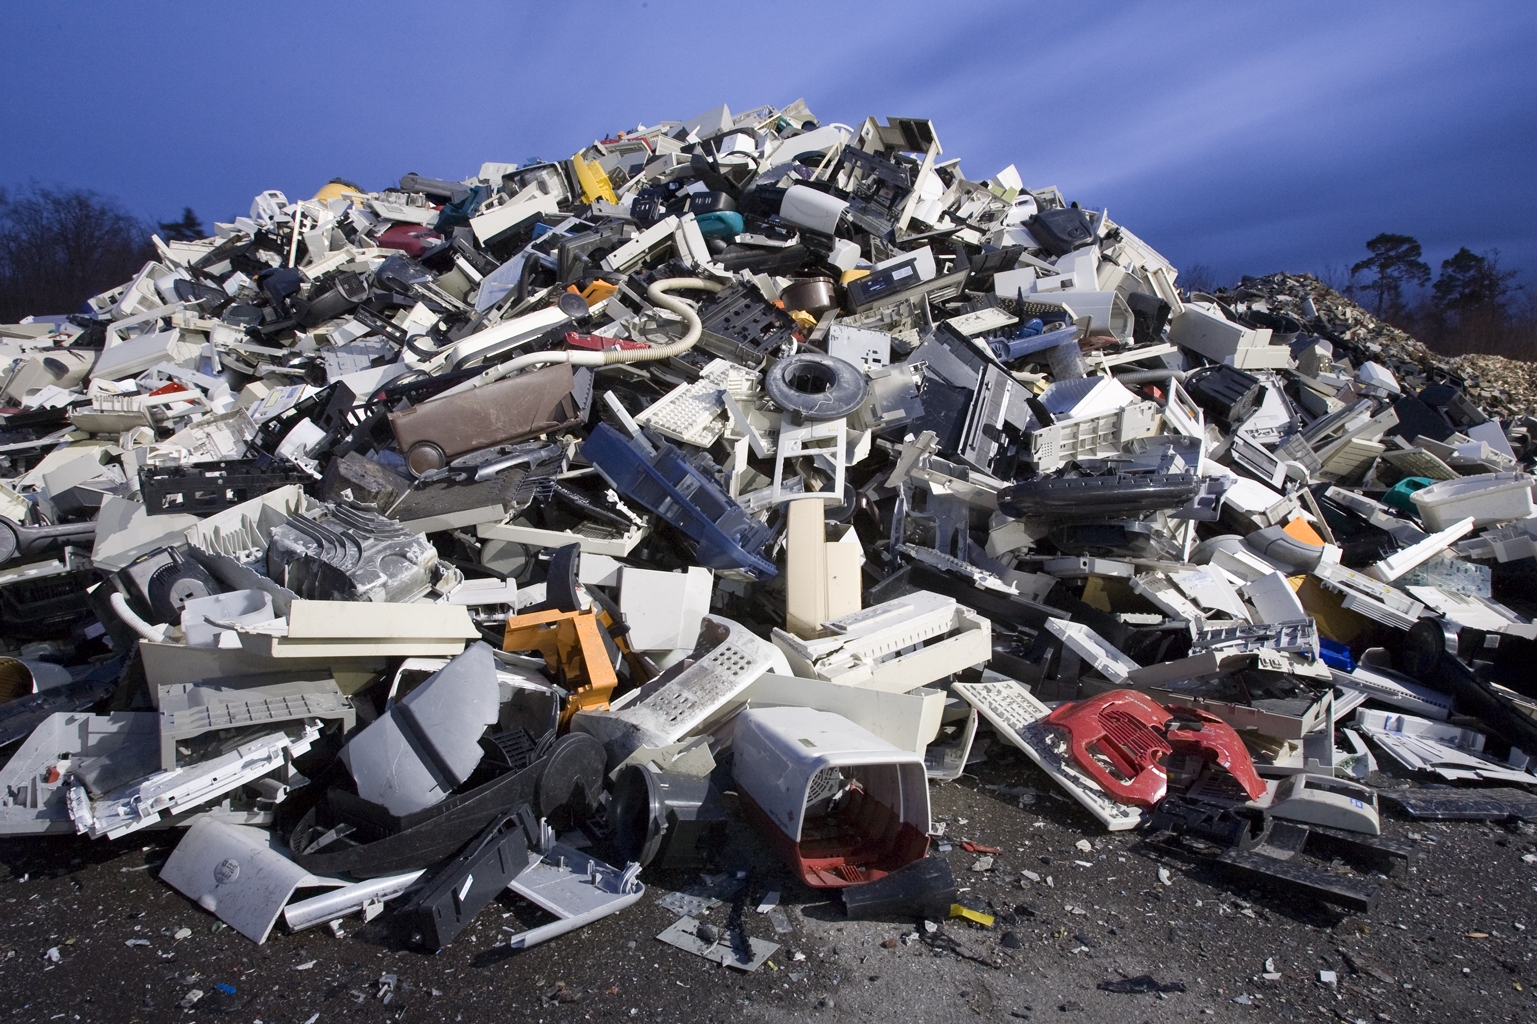 plastics-from-e-waste-from-national-geographic-photographer